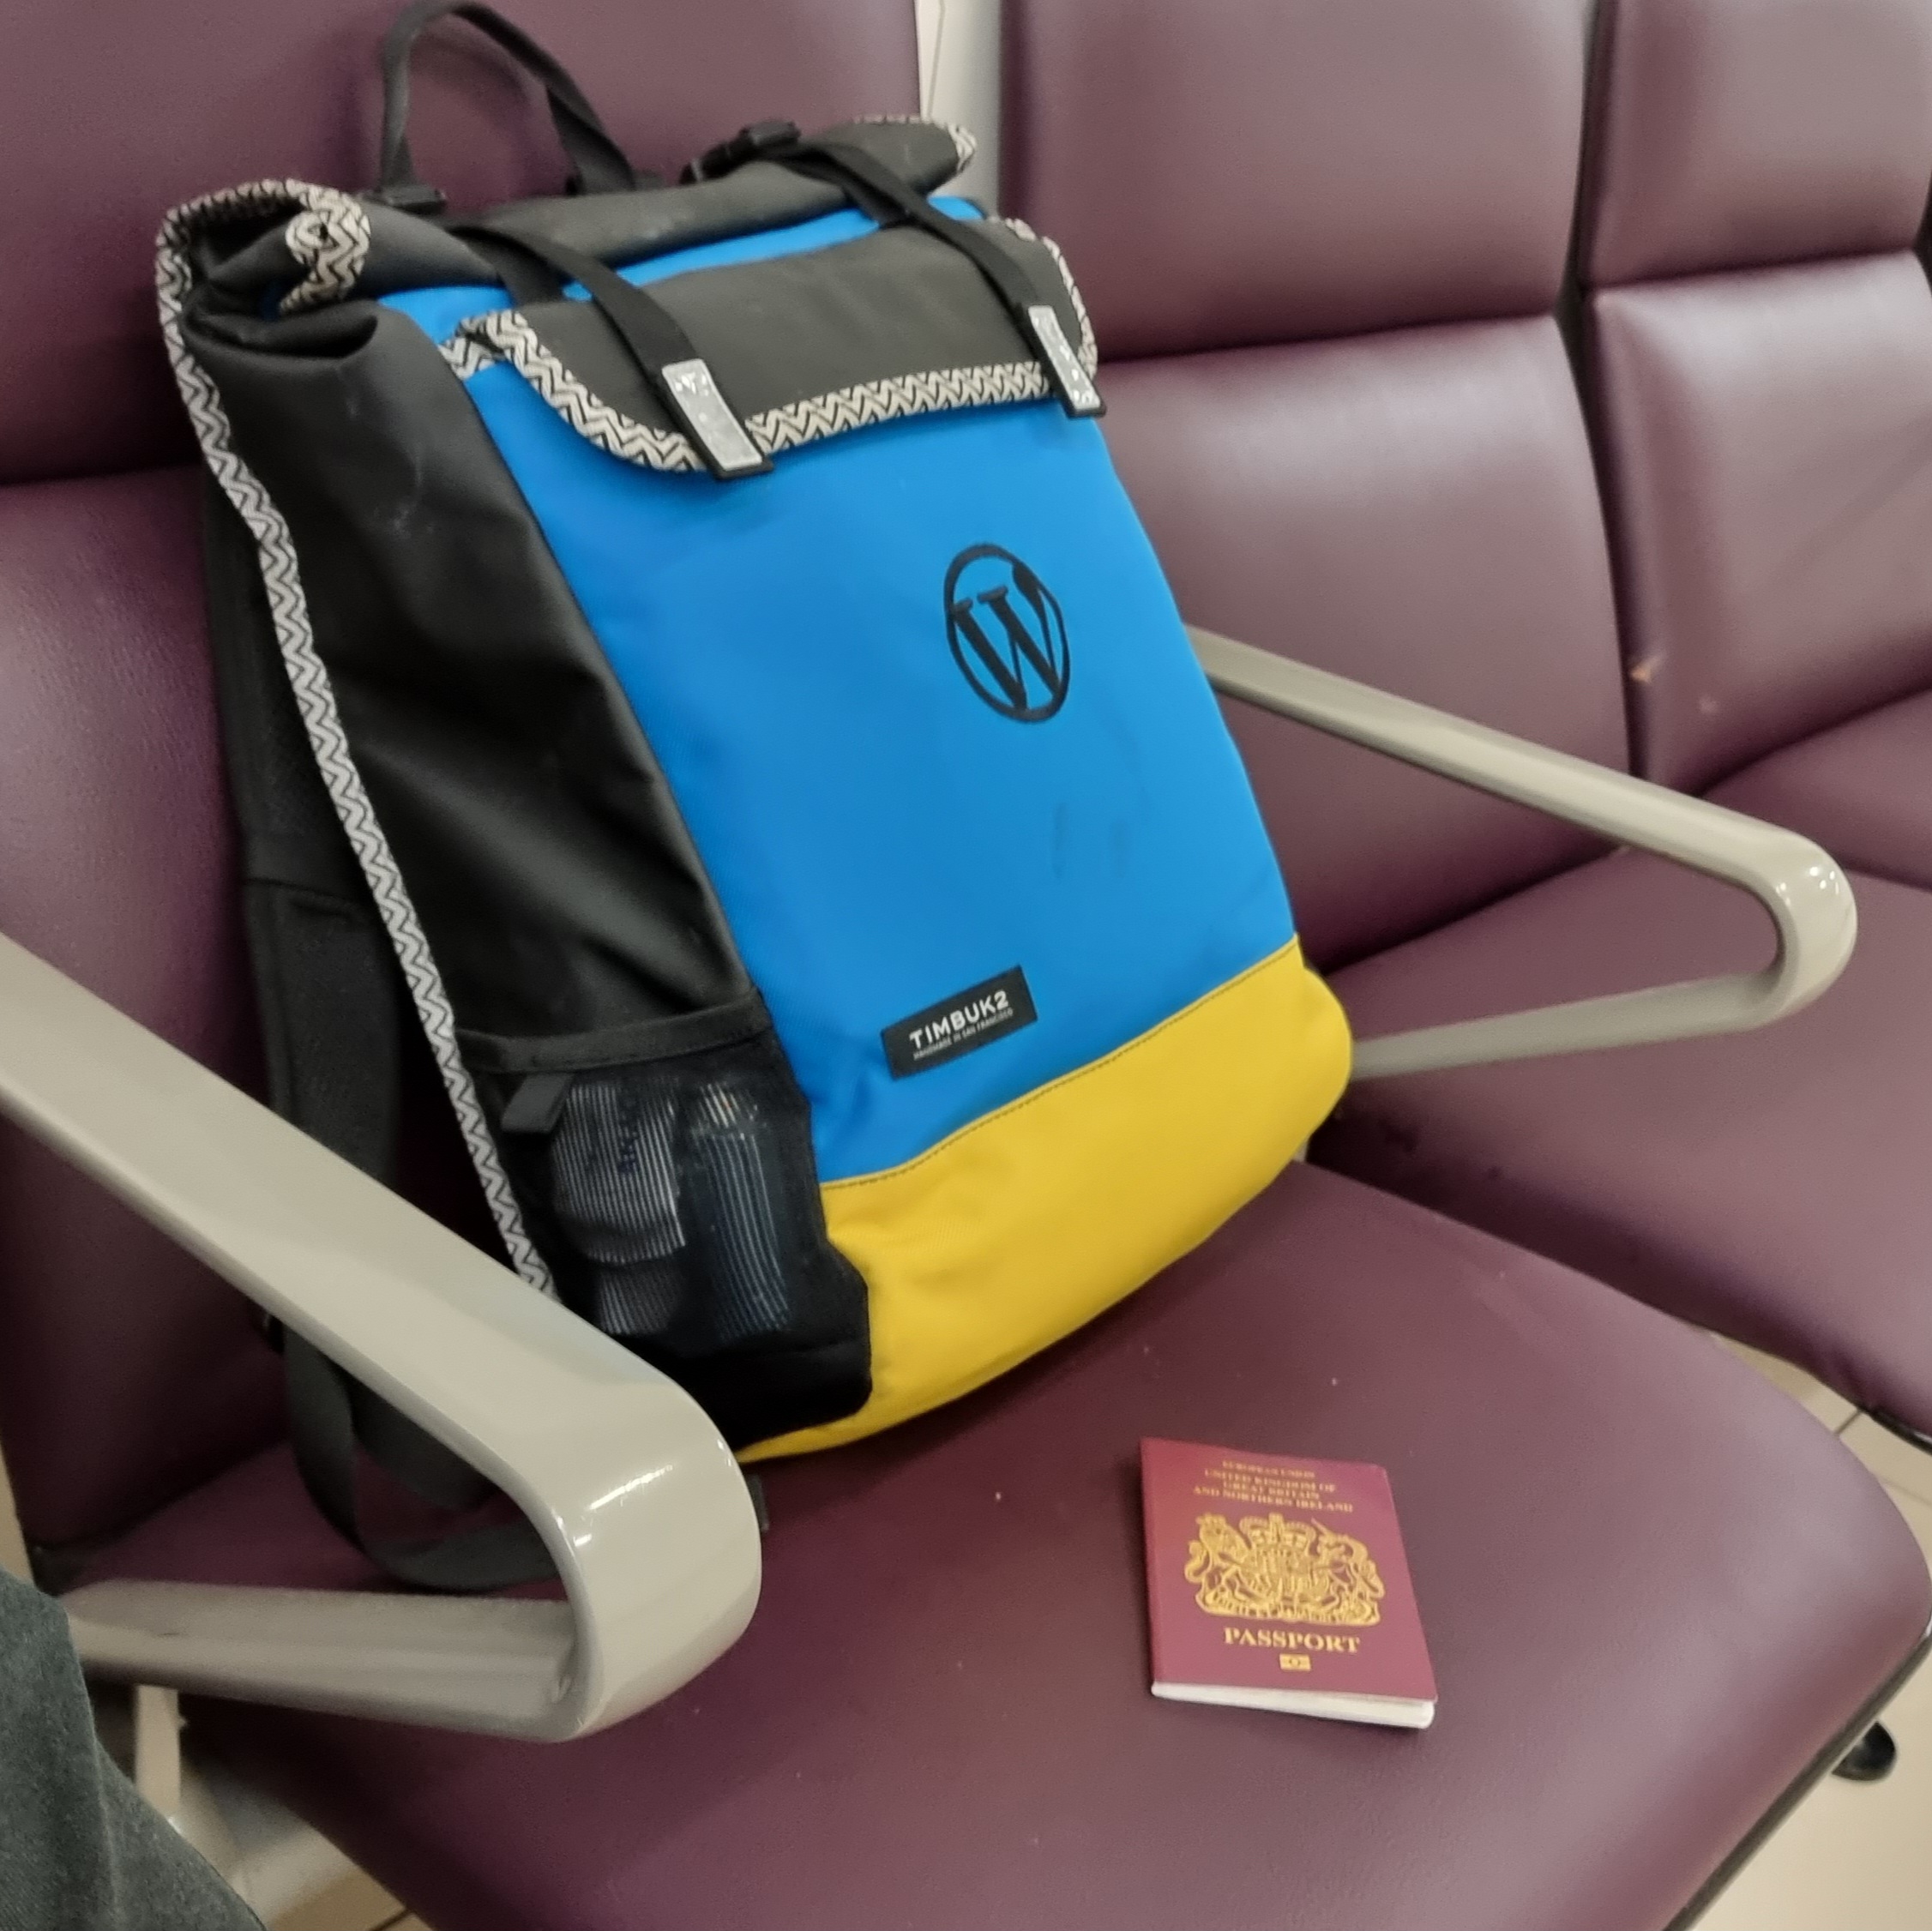 A modest-sized backpack in blue and yellow, with a WordPress logo stiched on, sits on an airport departure lounge bench. Alongside it is a burgundy-coloured British passport.